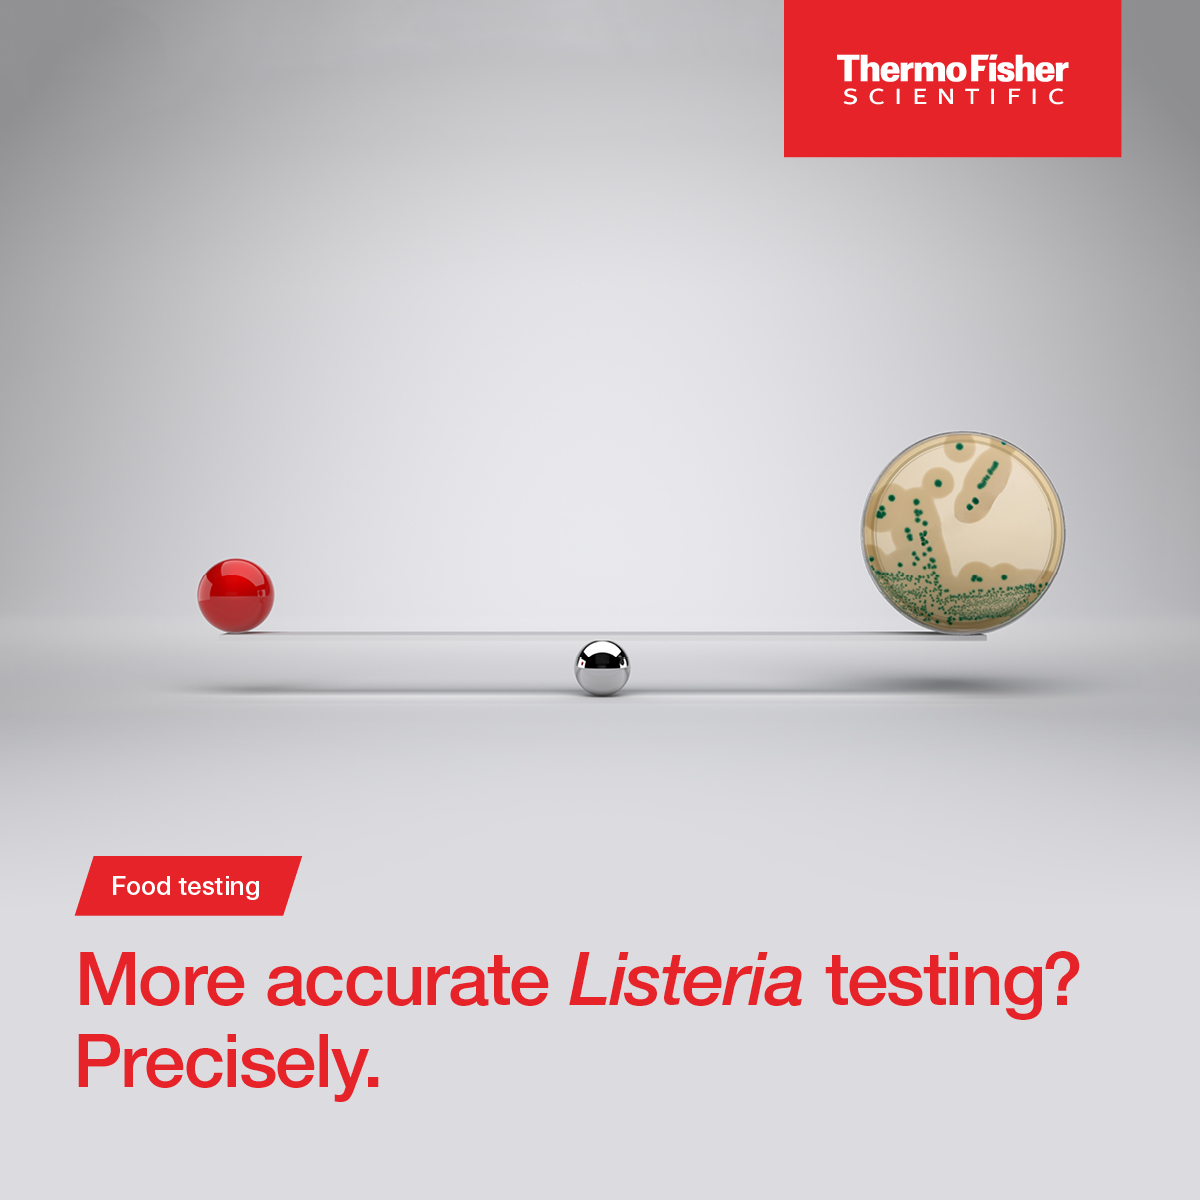 Enable simpler handling of #Listeria samples for food and environmental testing with the new Thermo Scientific™ Listeria Precis™ Methods – reducing plate inoculation time by 33%: ow.ly/9i7R50M47f0